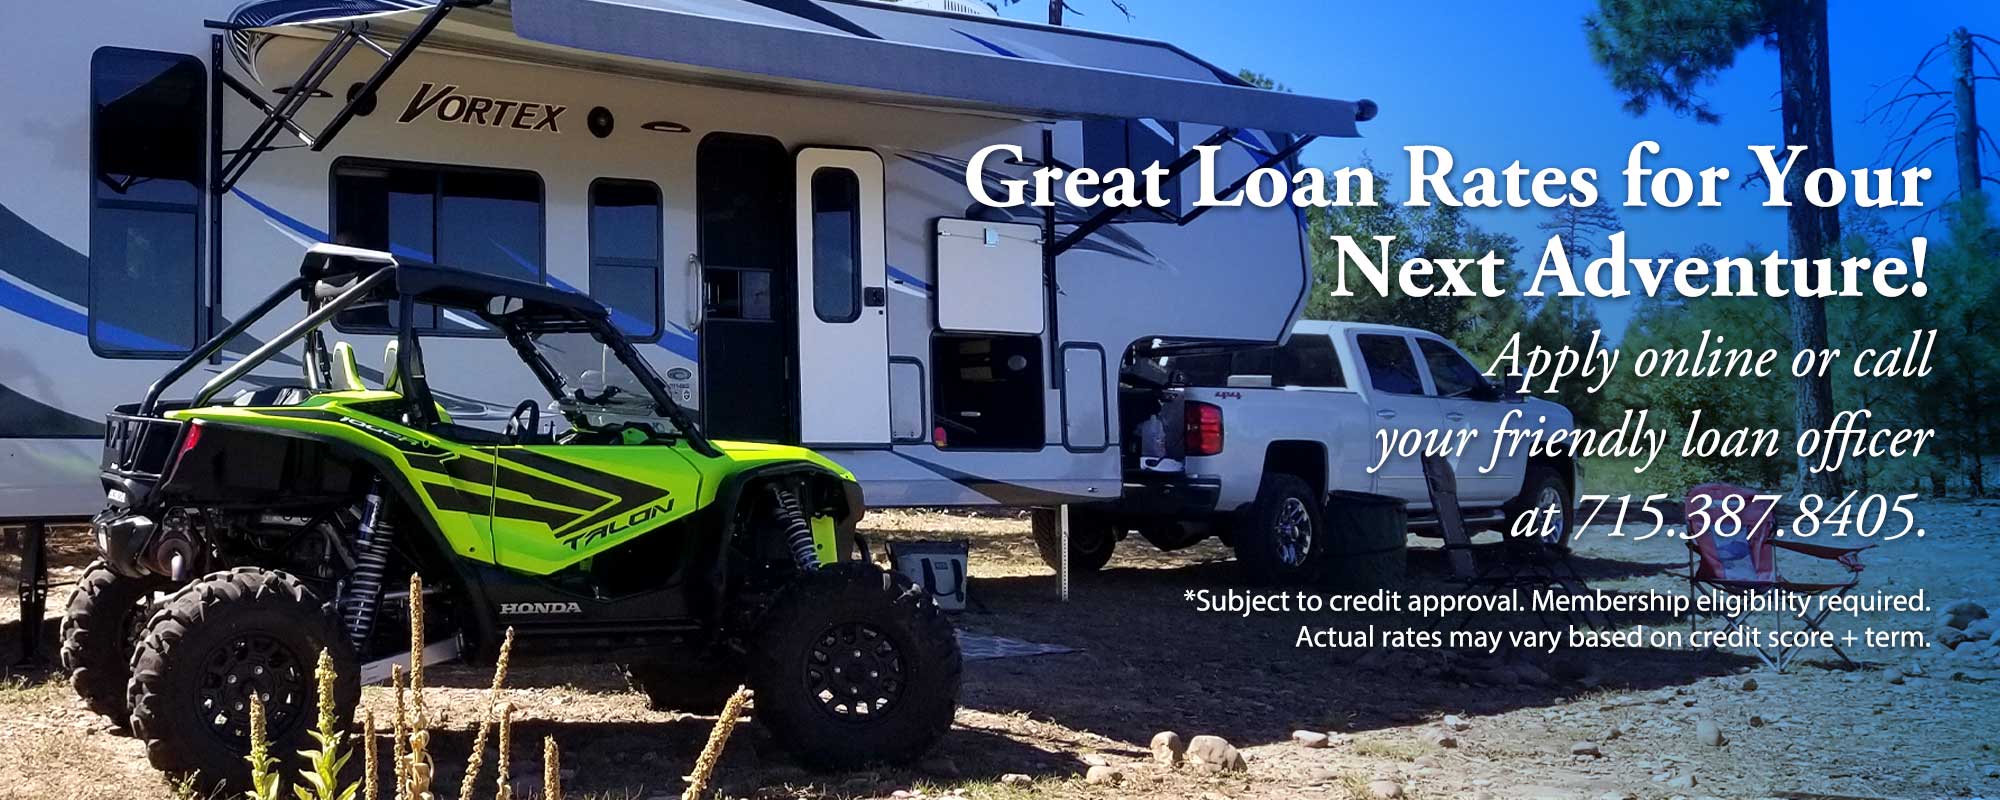 Great Loan Rates for your next adventure!